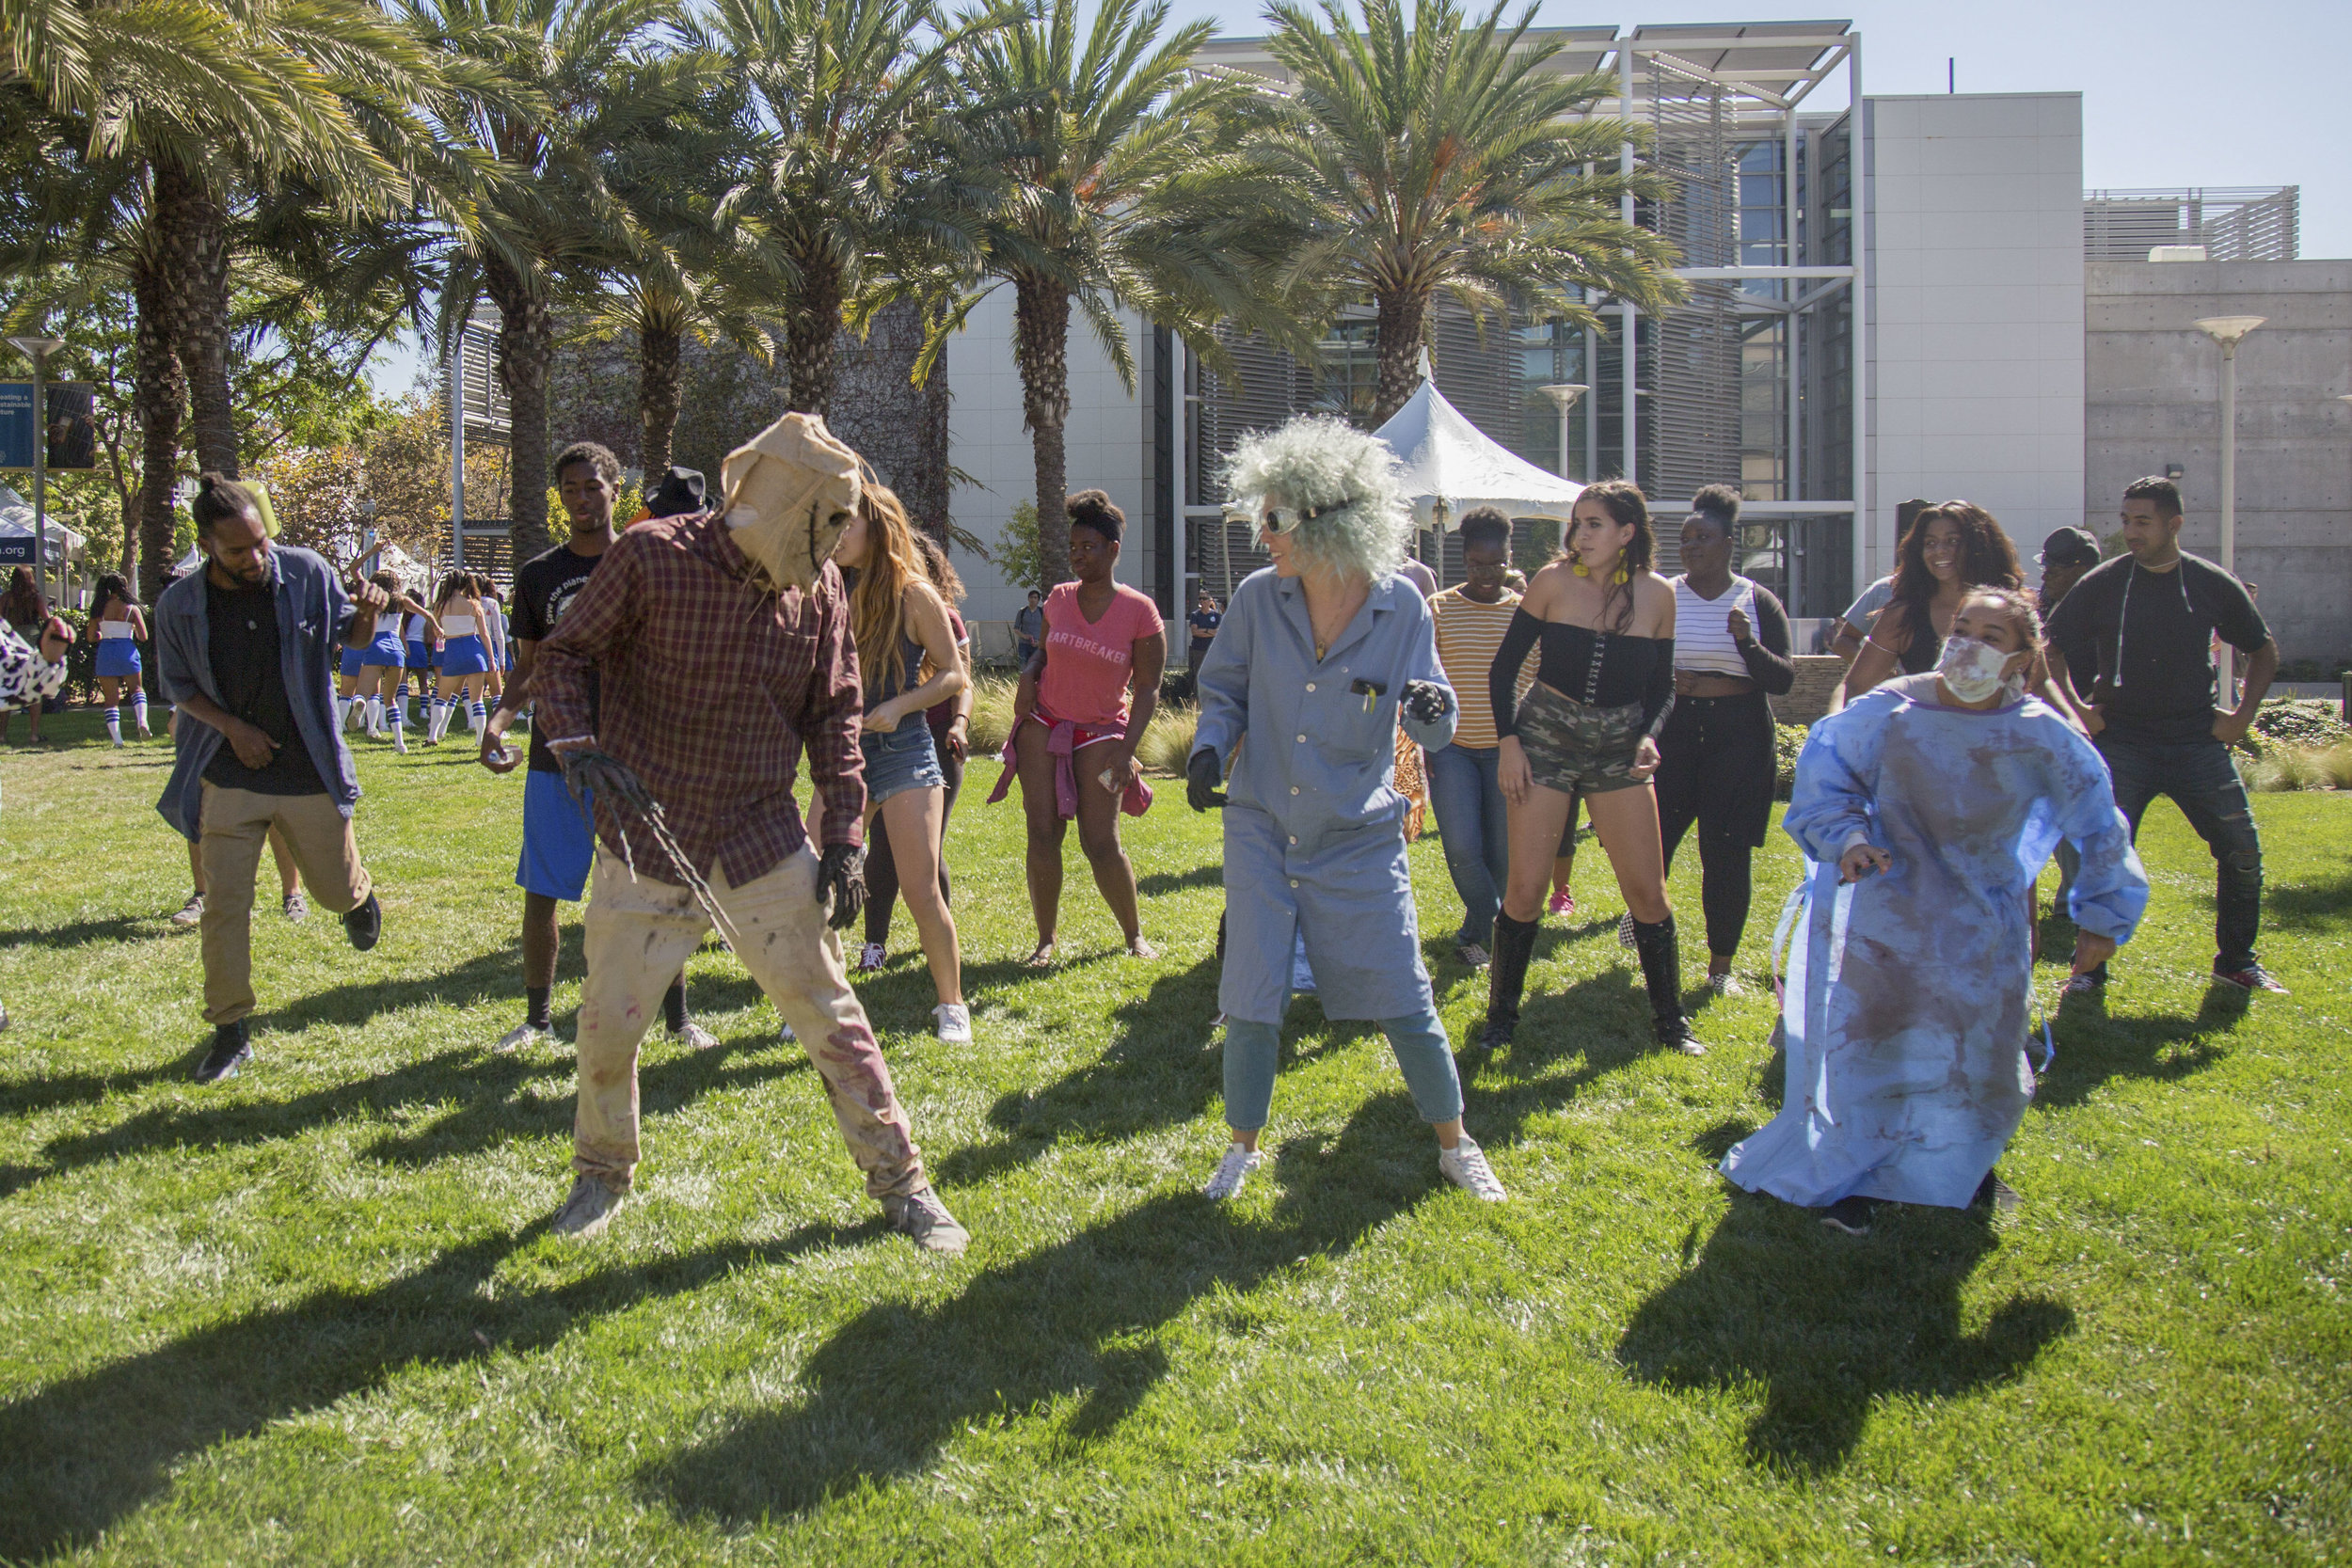  Students dance to the music during Club Row event at Santa Monica College Main Campus on Thursday, October 26th, 2017 in Santa Monica, Calif. (Photo by Yuki Iwamura) 